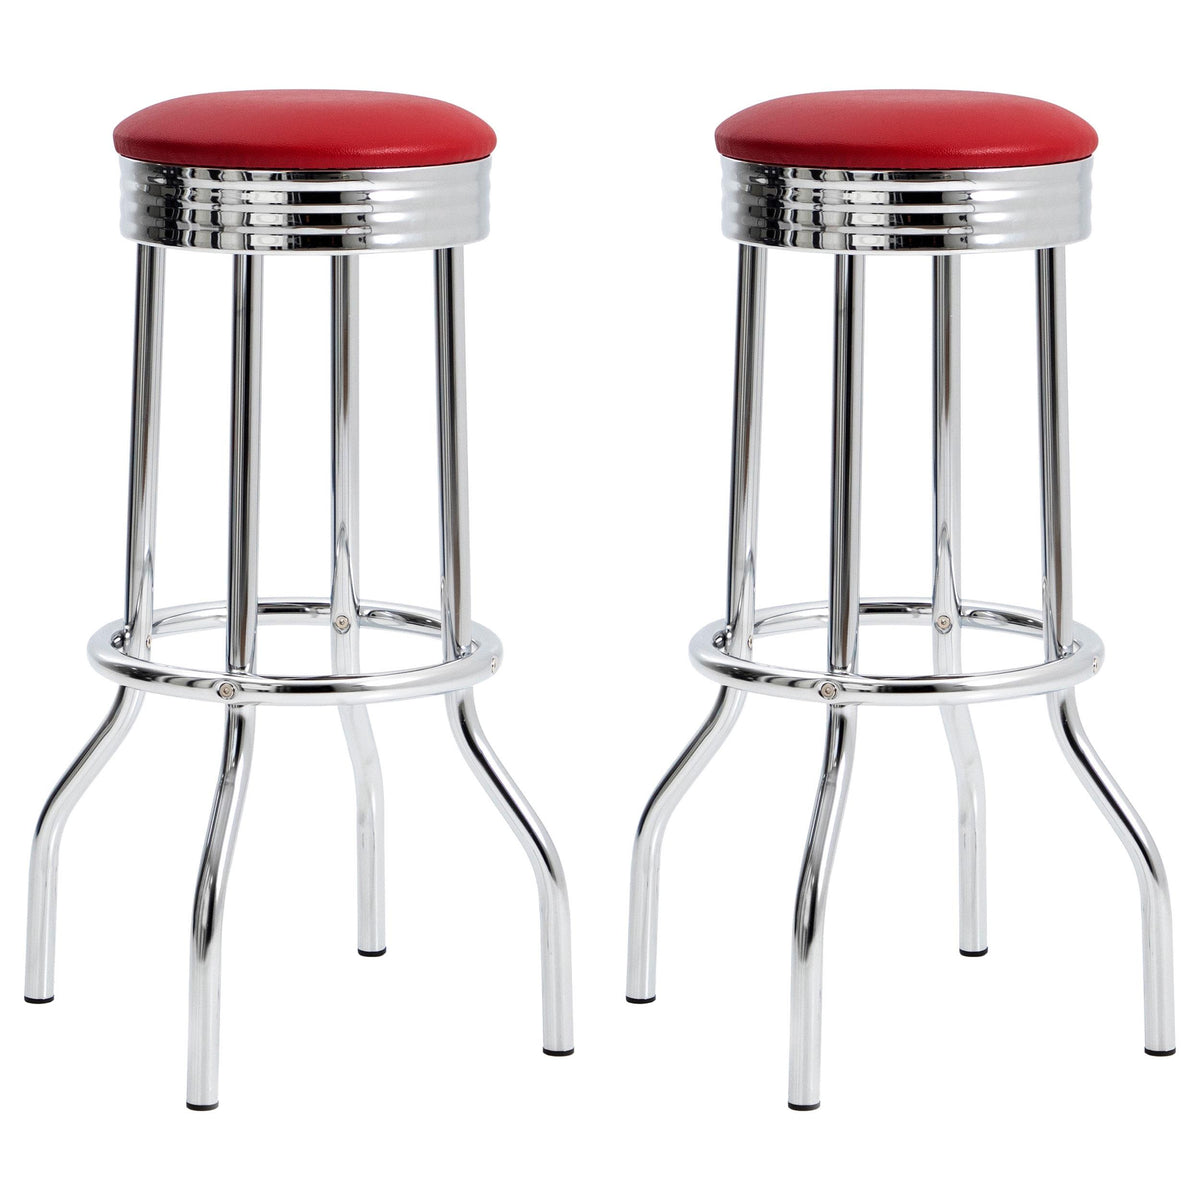 Theodore Upholstered Top Bar Stools Red and Chrome (Set of 2)  Half Price Furniture